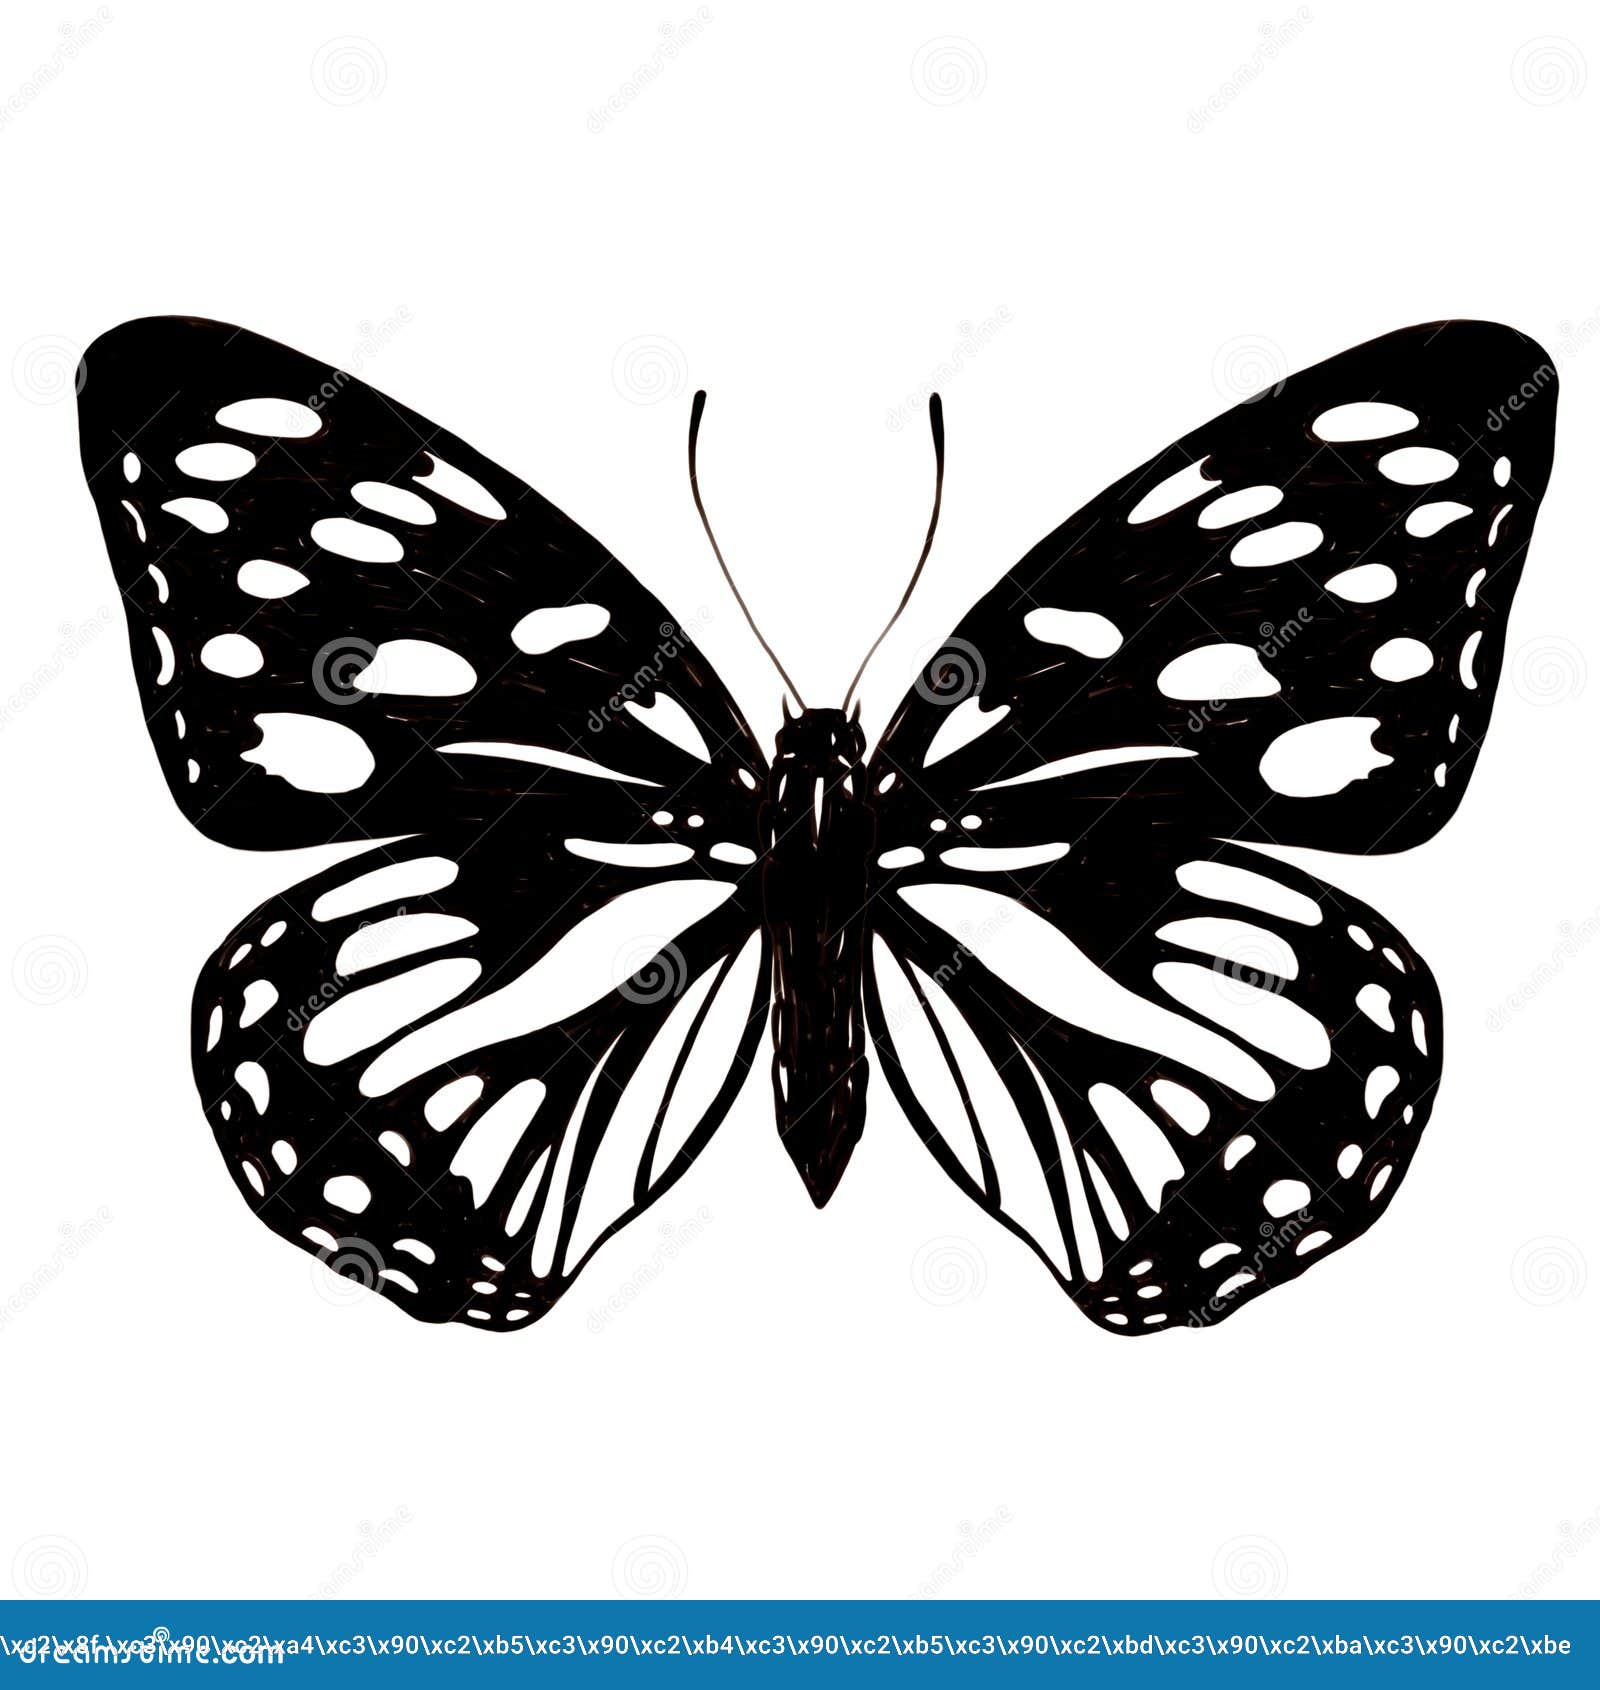 Black and White Butterfly Wallpaper  Monochrome Butterflies Mural   Happywall